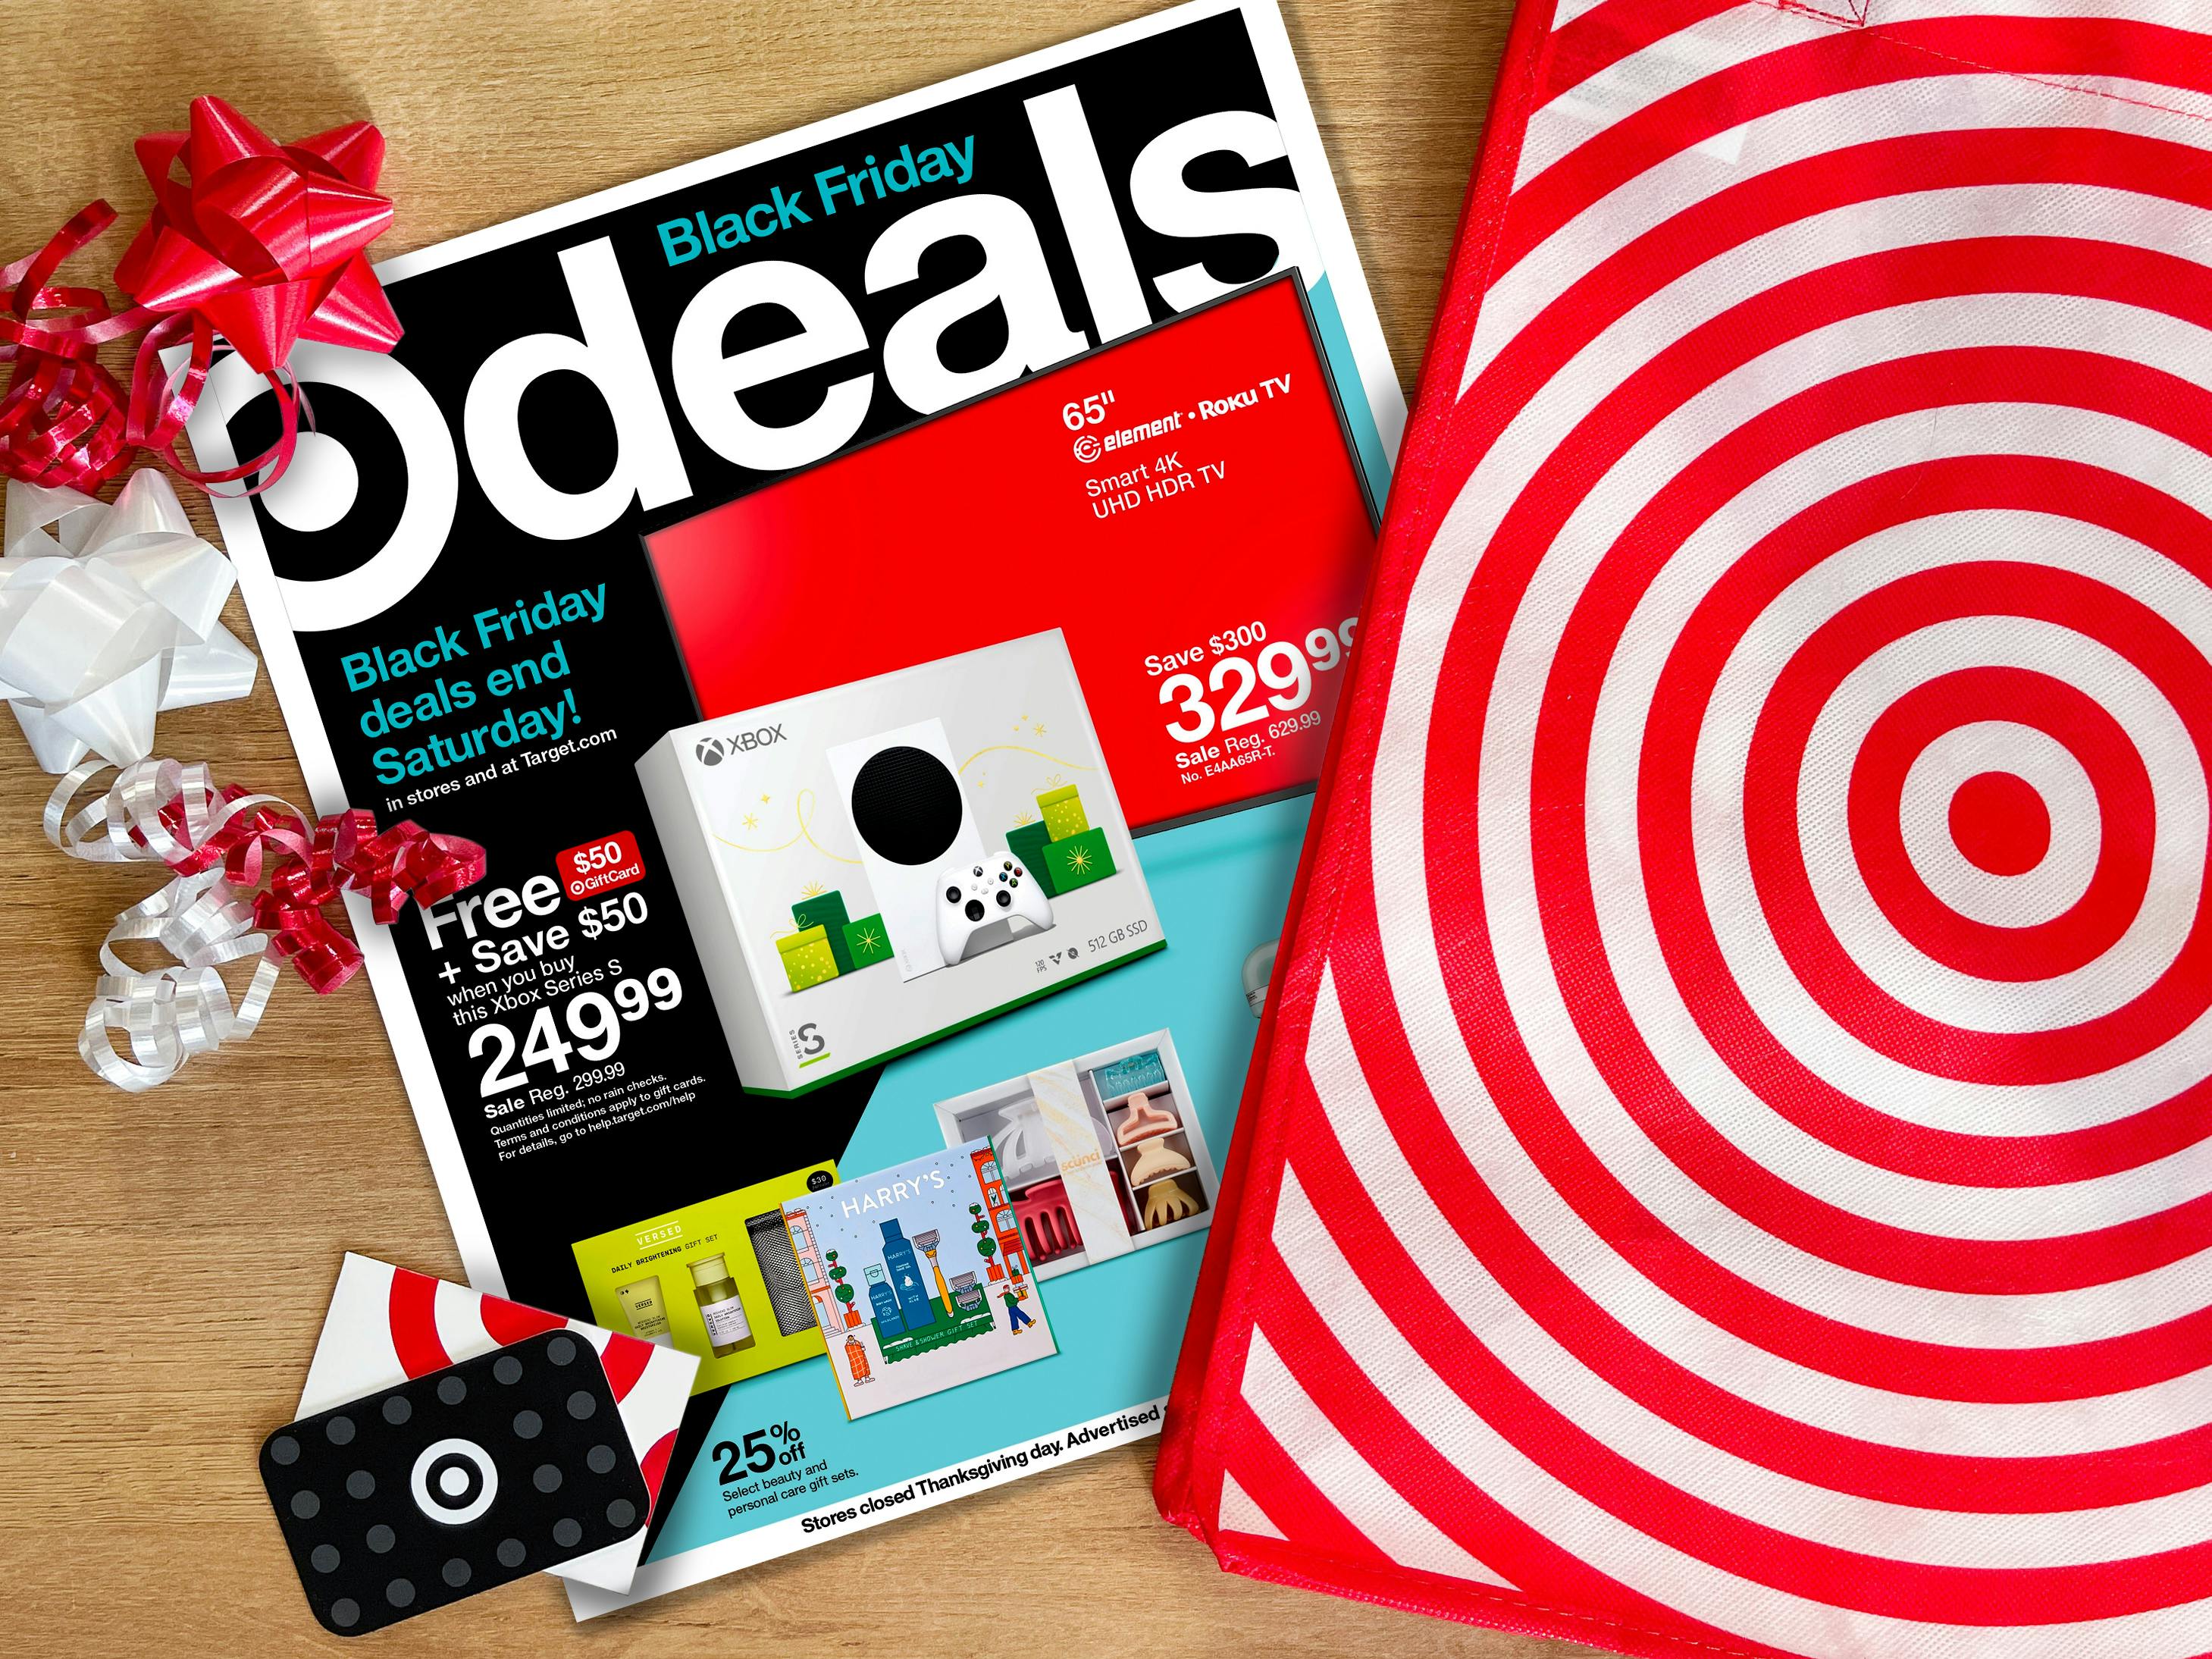 A Target Black Friday 2022 advertisement on a table with a Target bag, gift cards, and gift bows